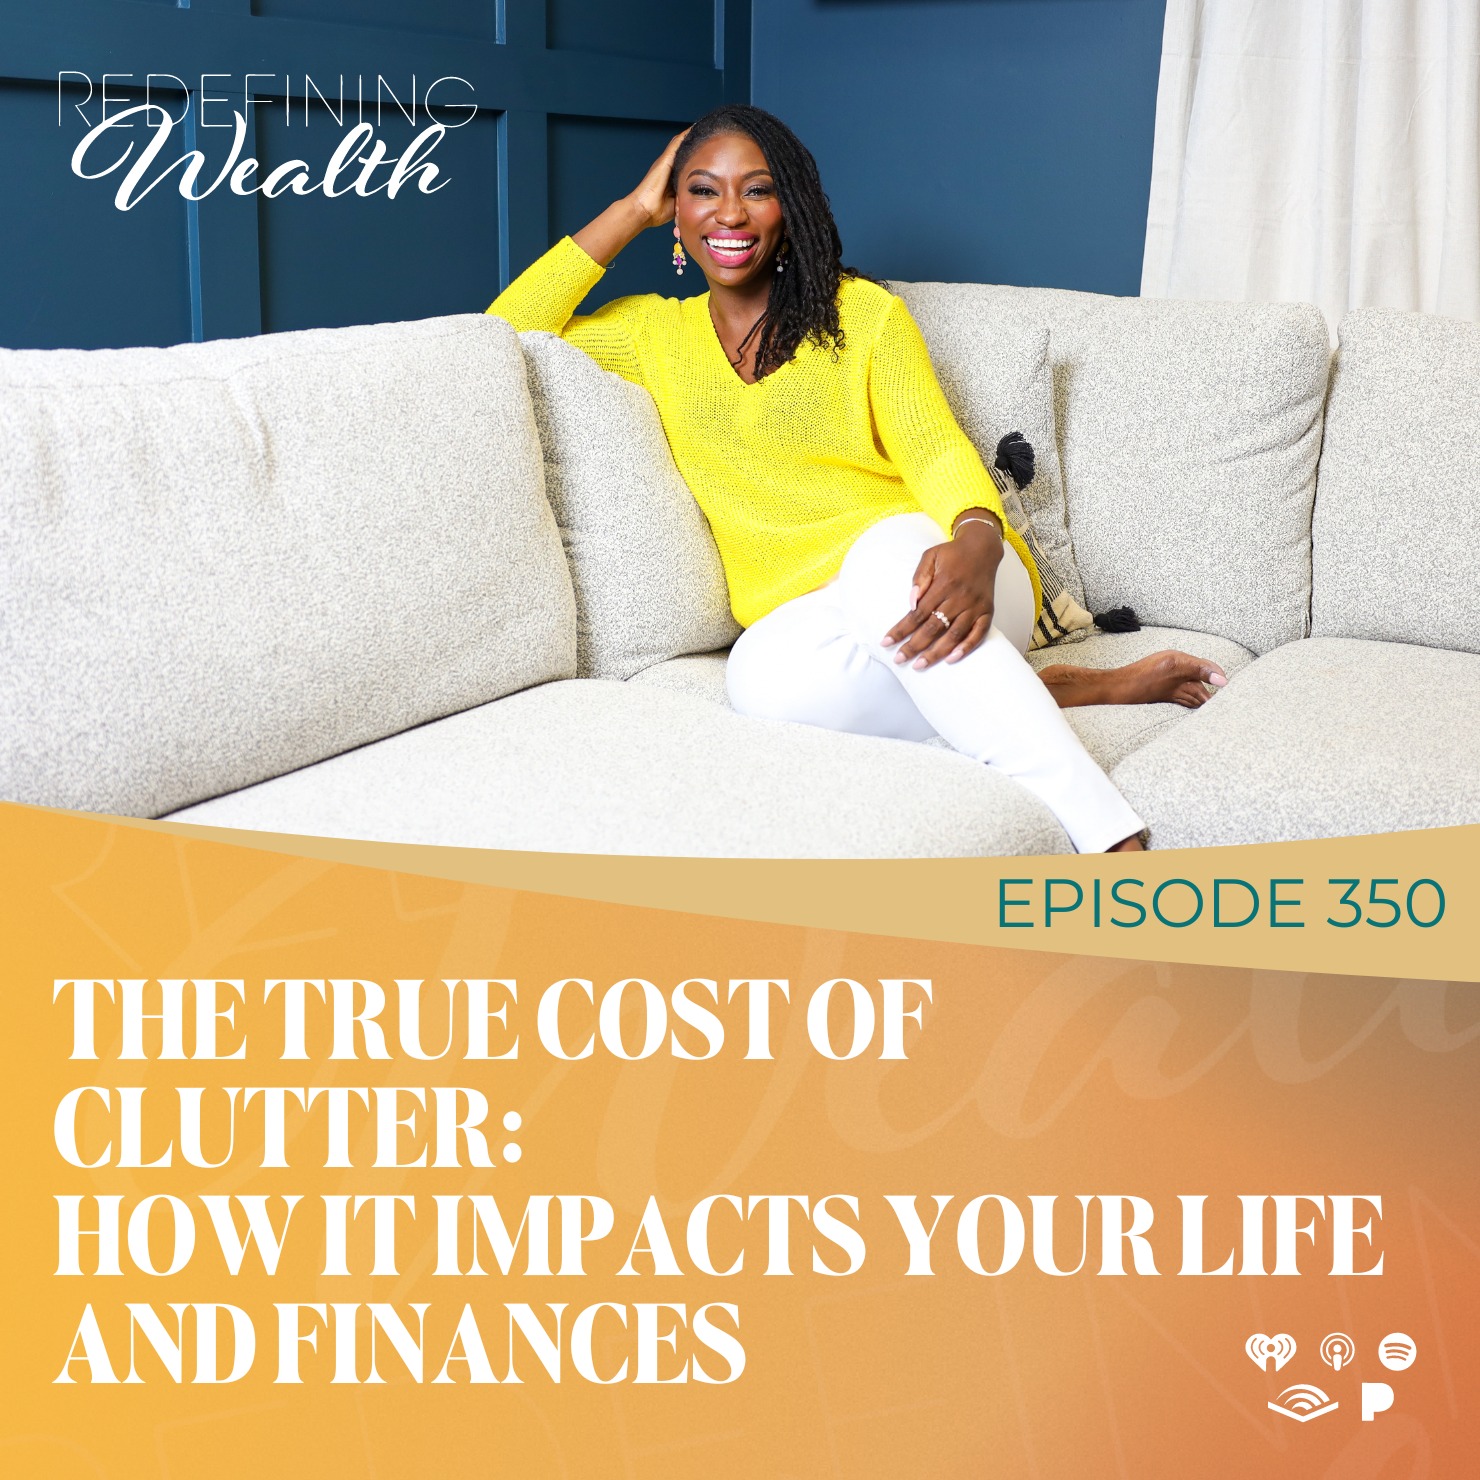 The True Cost of Clutter: How It Impacts Your Life and Finances